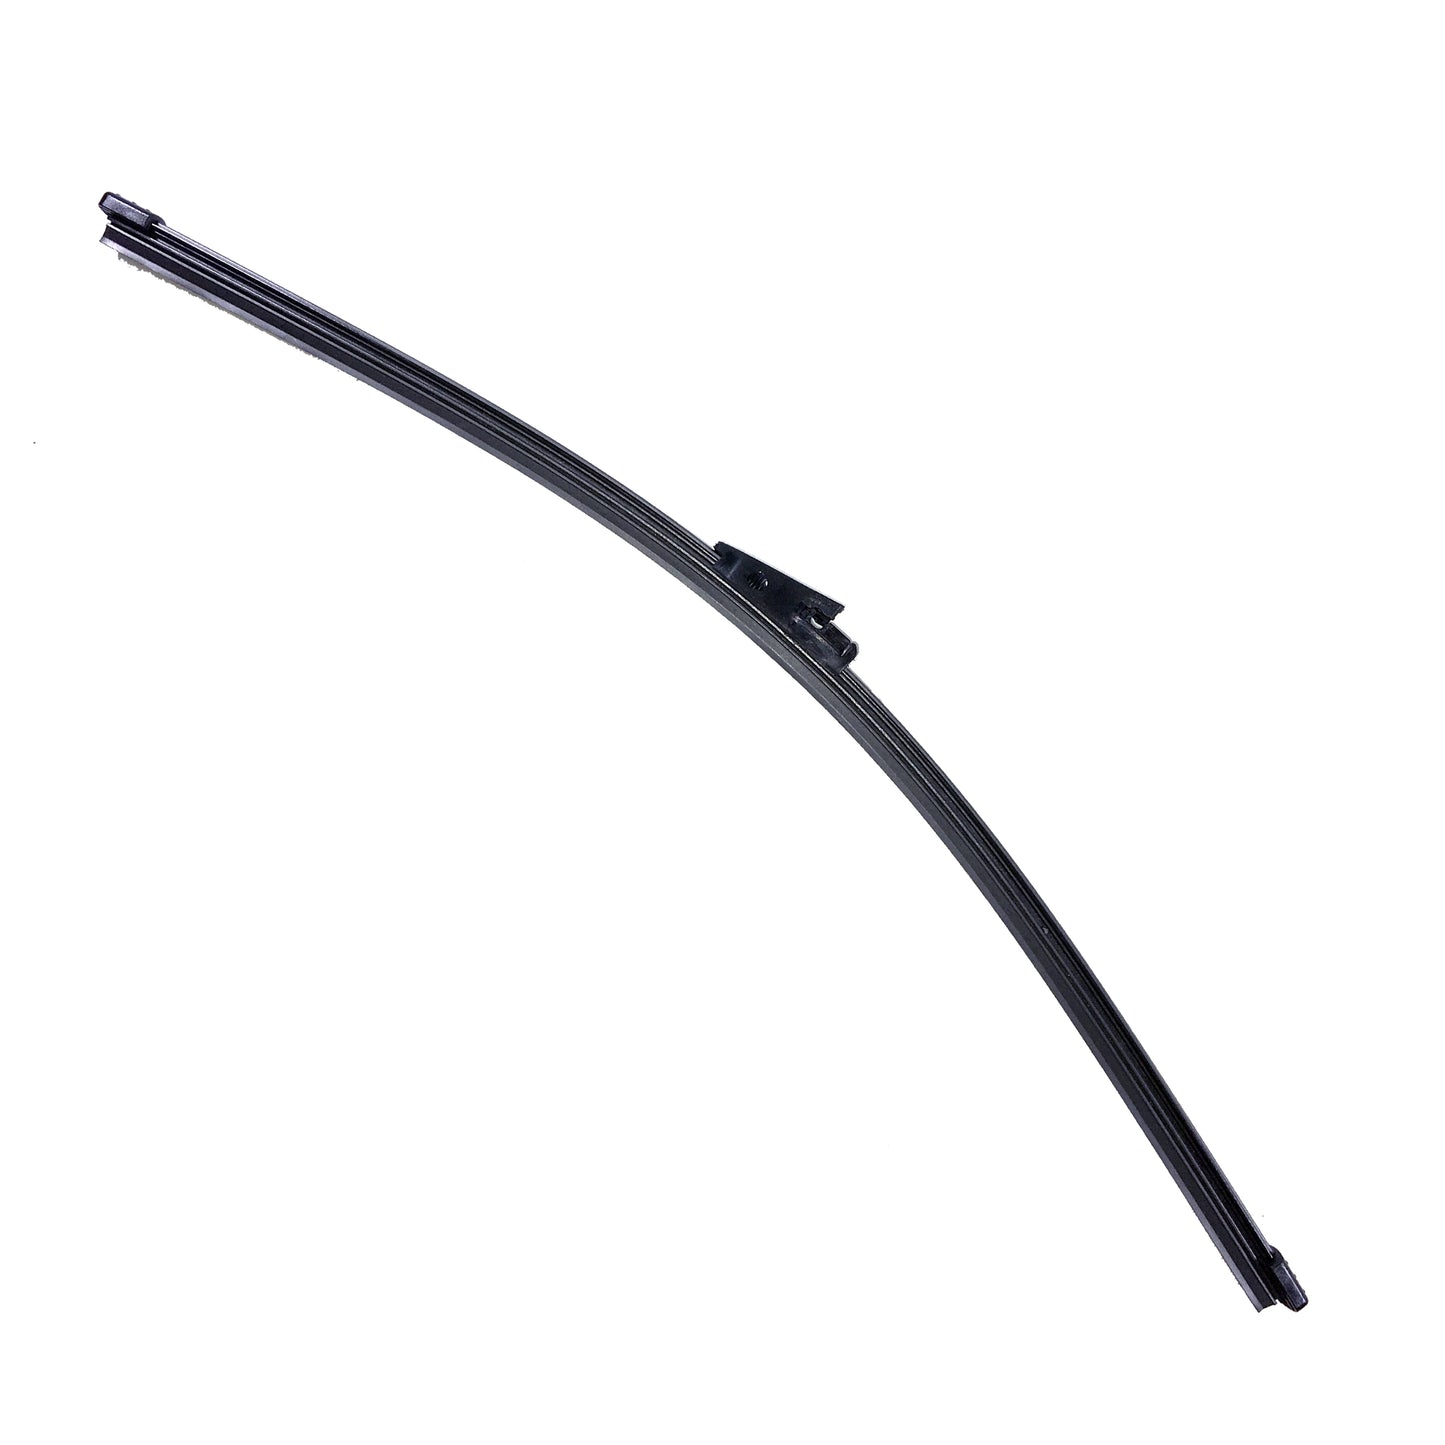 VW TRANSPORTER Chassis Cab Apr 2003 to Nov 2009Rear Wiper Blade 